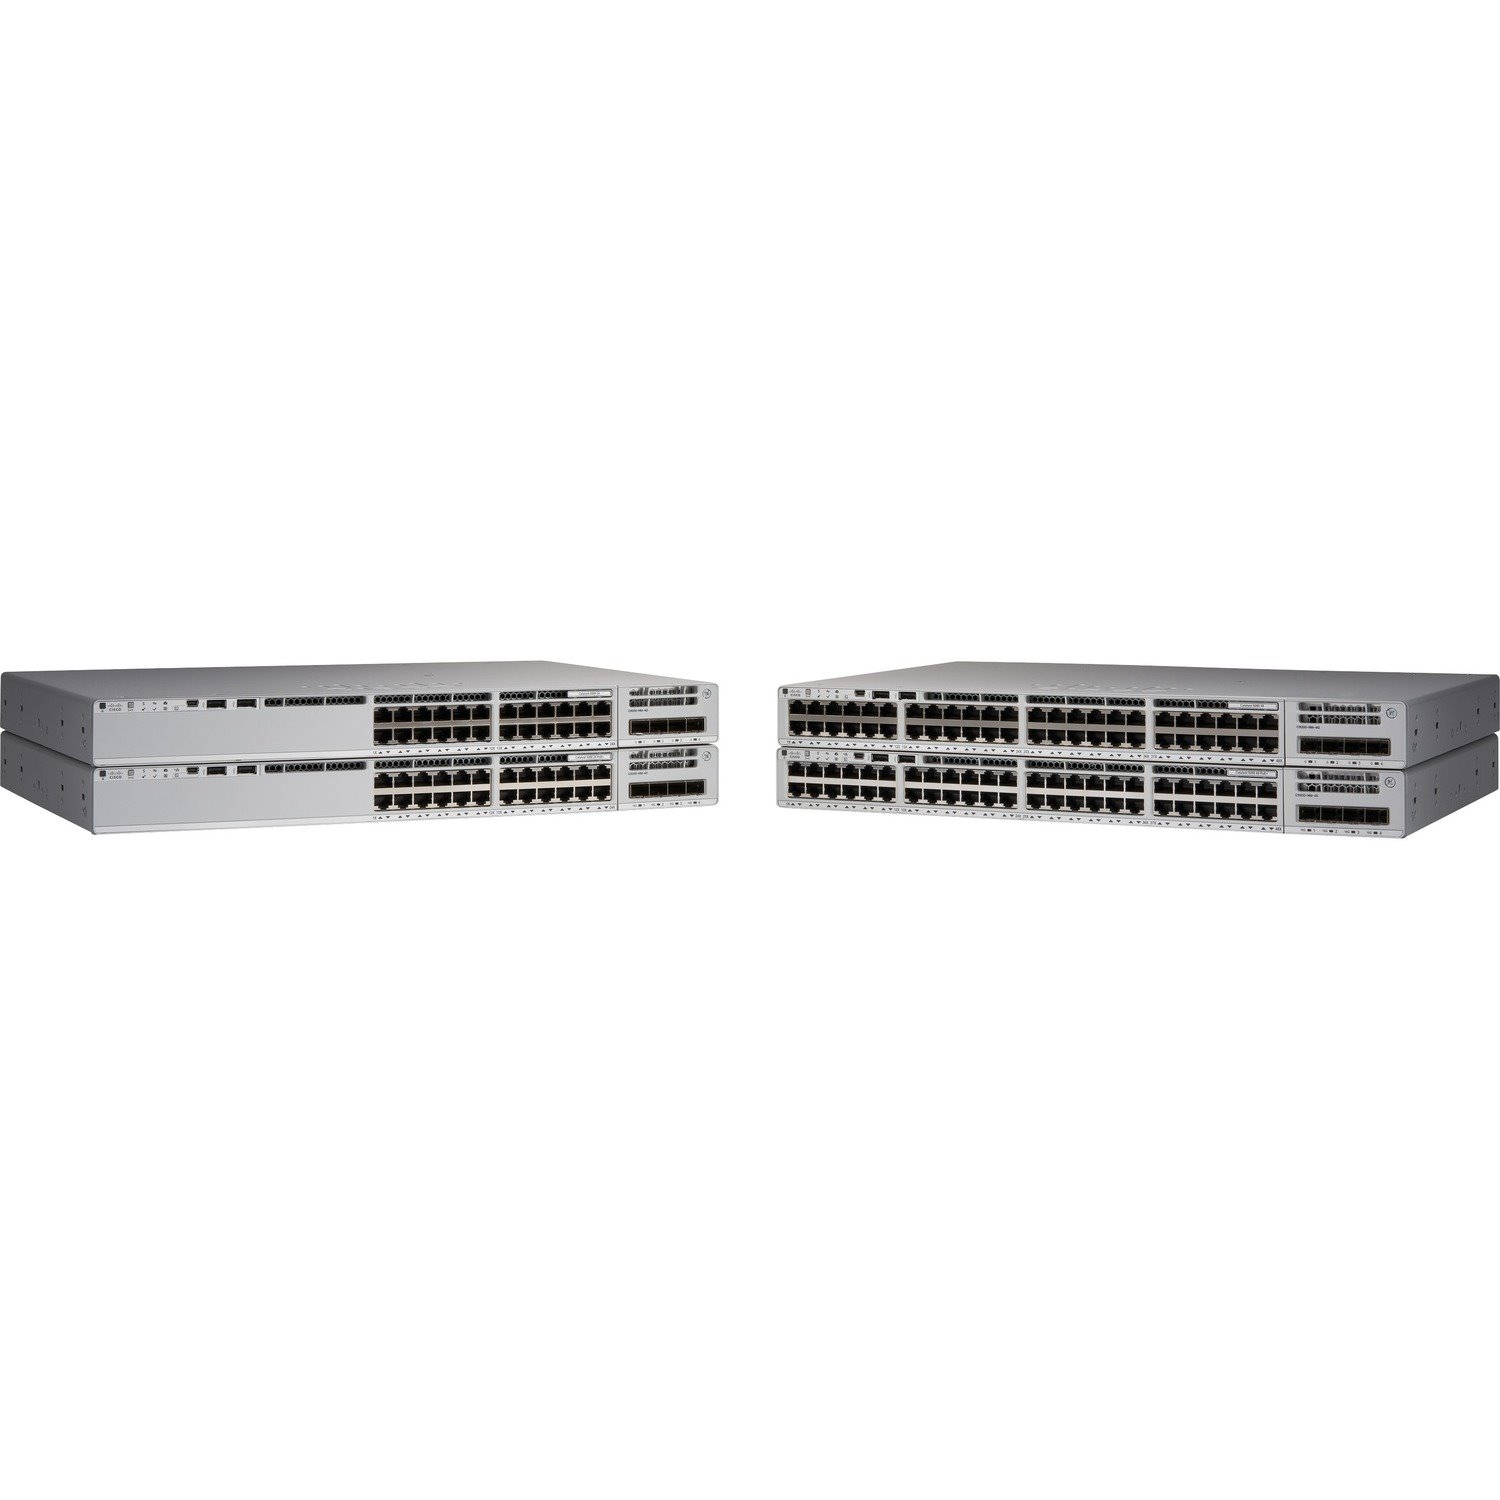 Cisco Catalyst 9200 C9200L-24T-4G-E 24 Ports Manageable Ethernet Switch - Refurbished